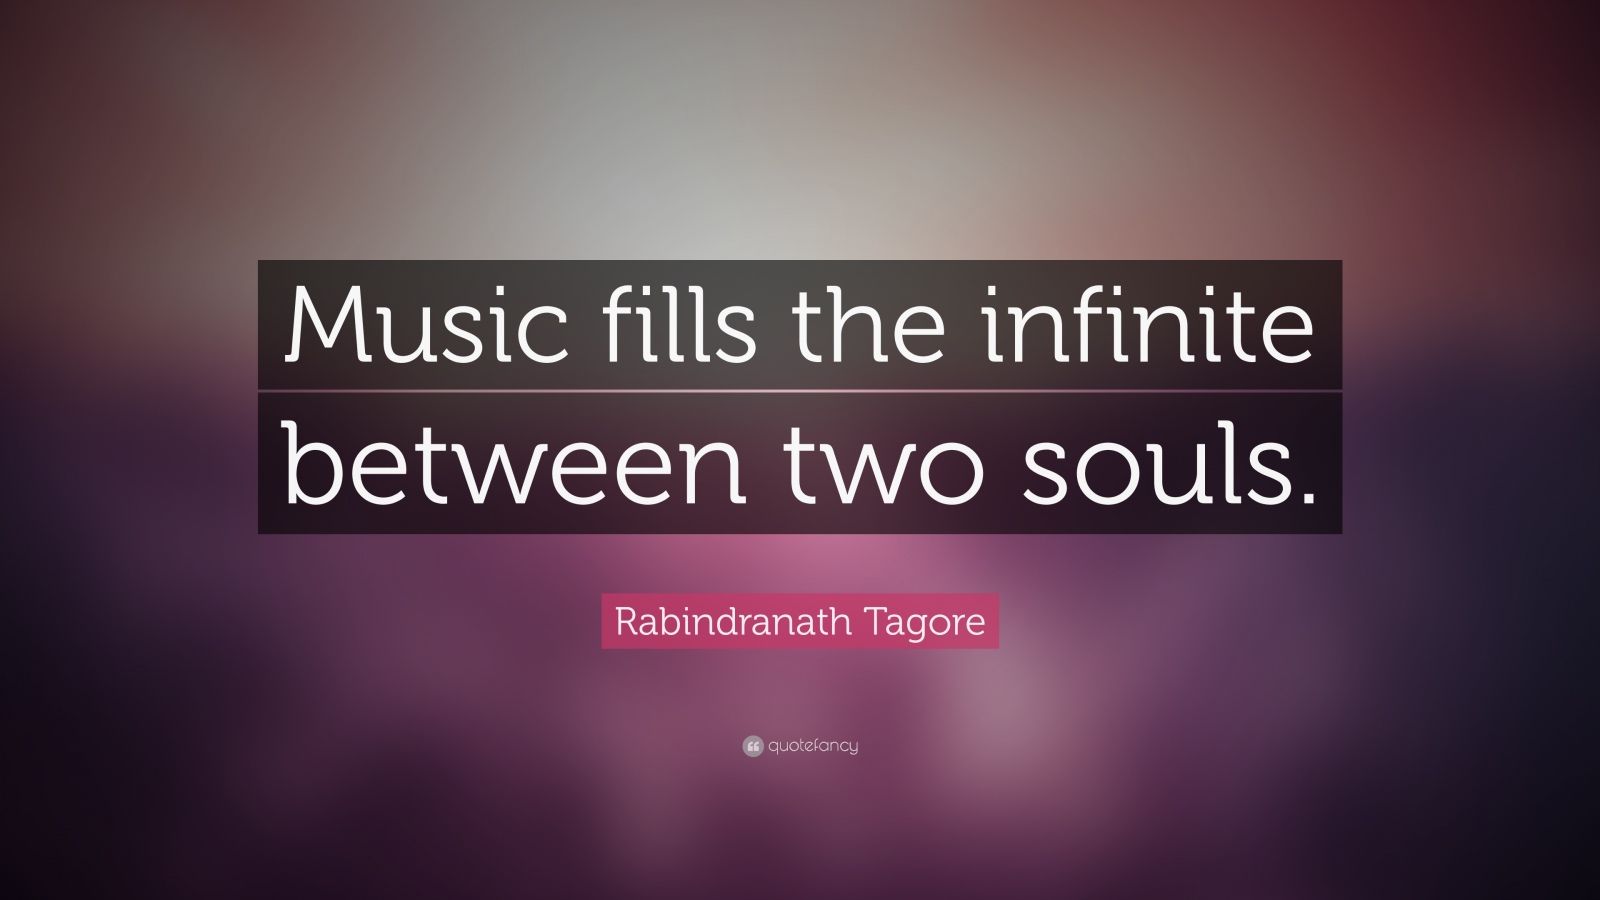 it heart quotes we deep love Tagore (100 wallpapers) Quotefancy  Quotes Rabindranath